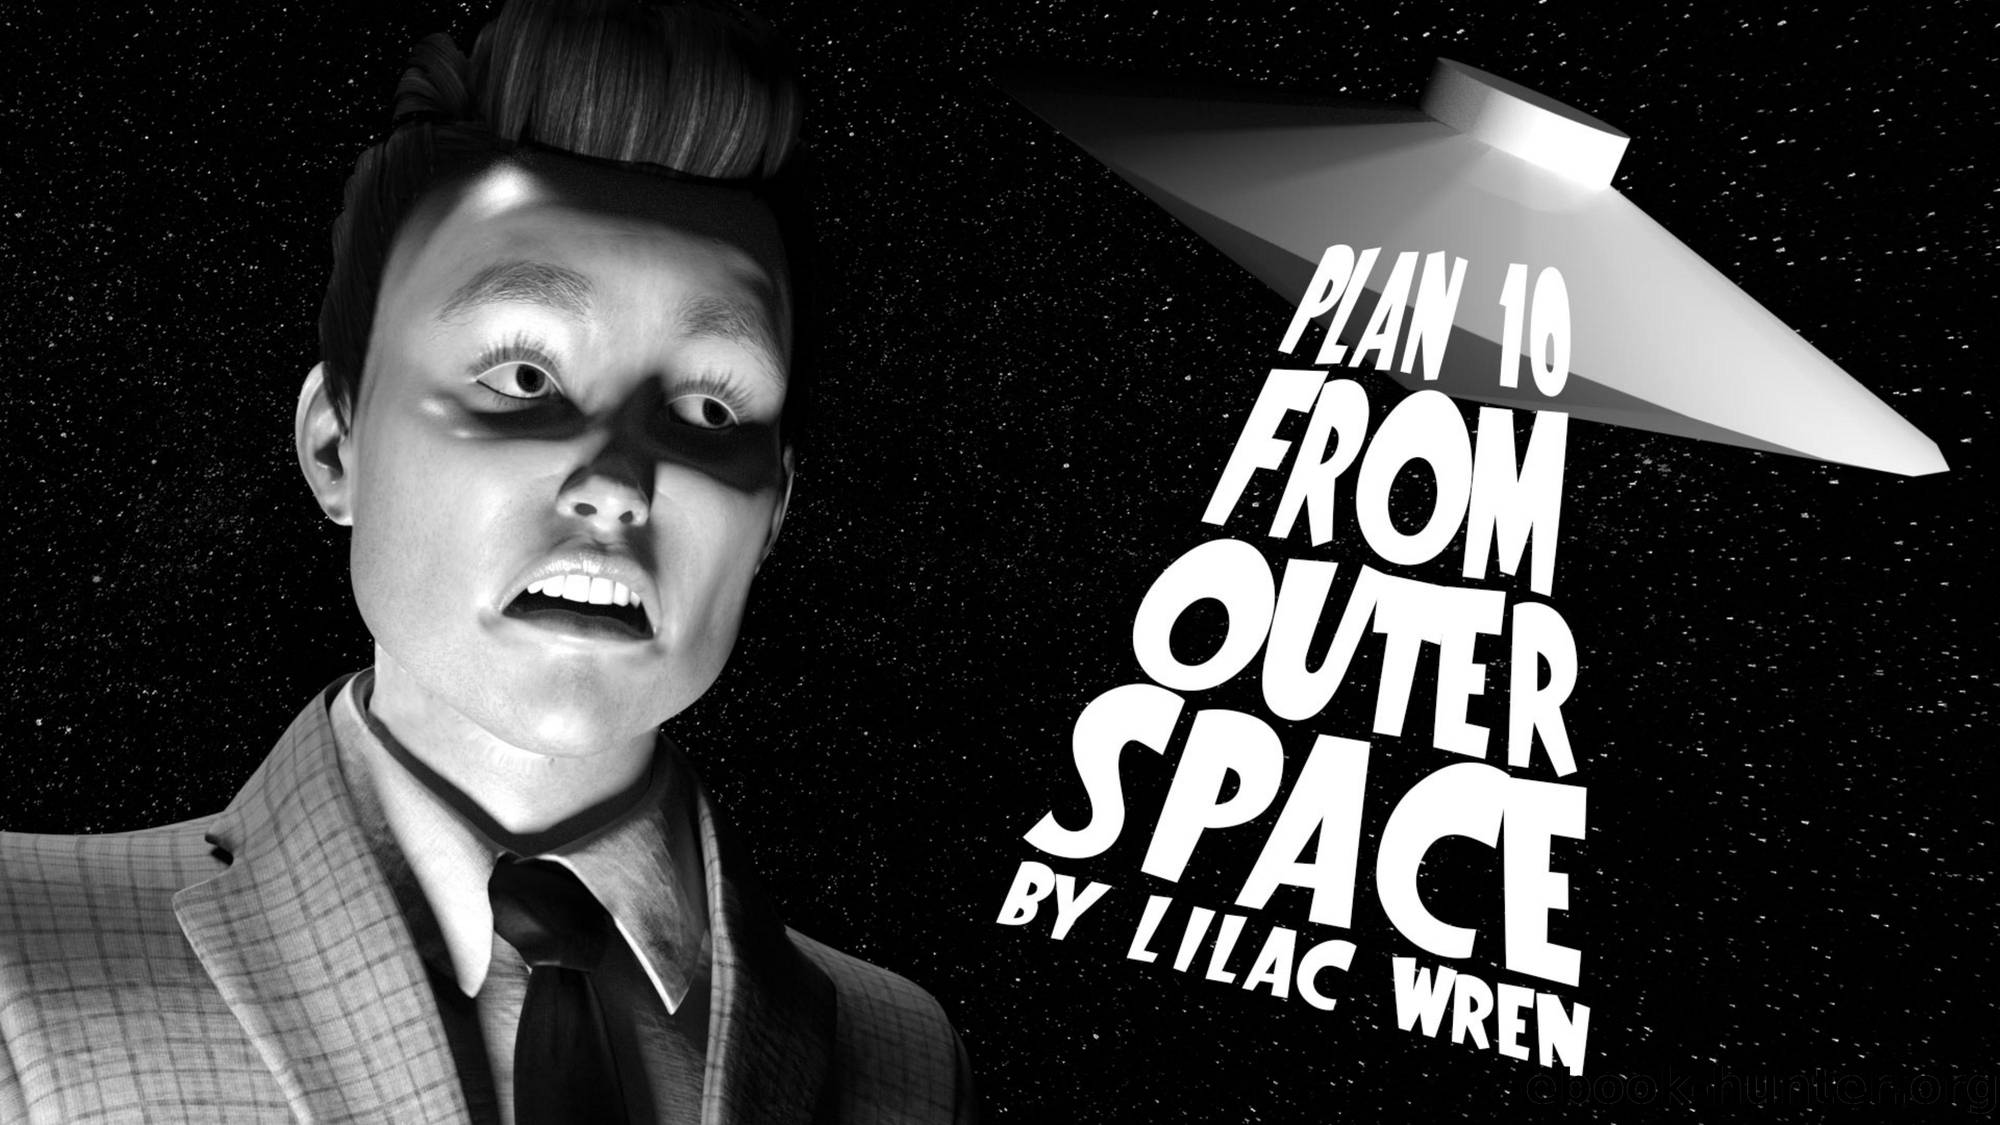 Plan 10 from Outer Space by Lilac Wren